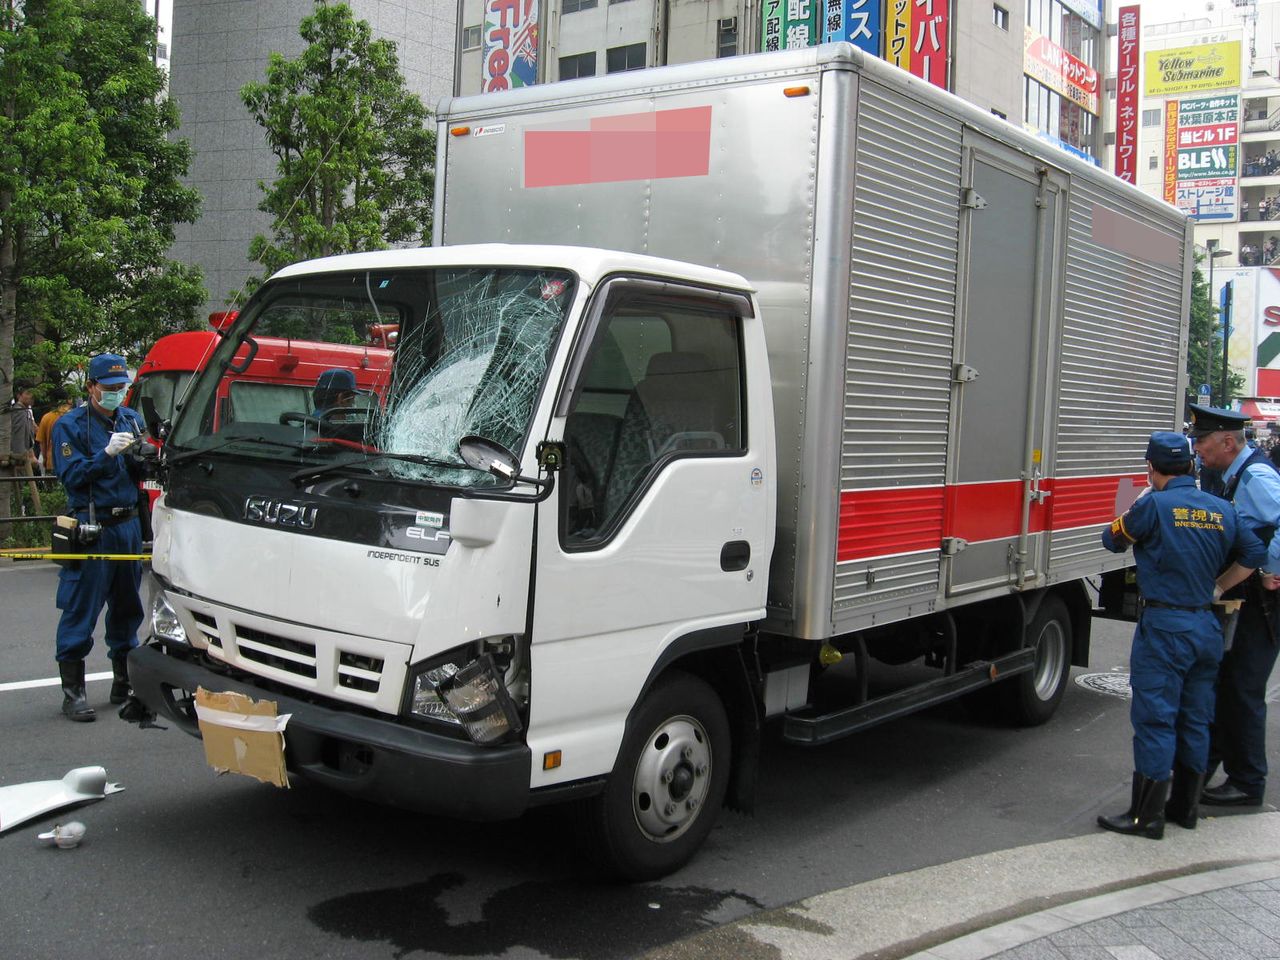 The truck used in the Akihabara attack on June 8, 2008. (© Jiji)